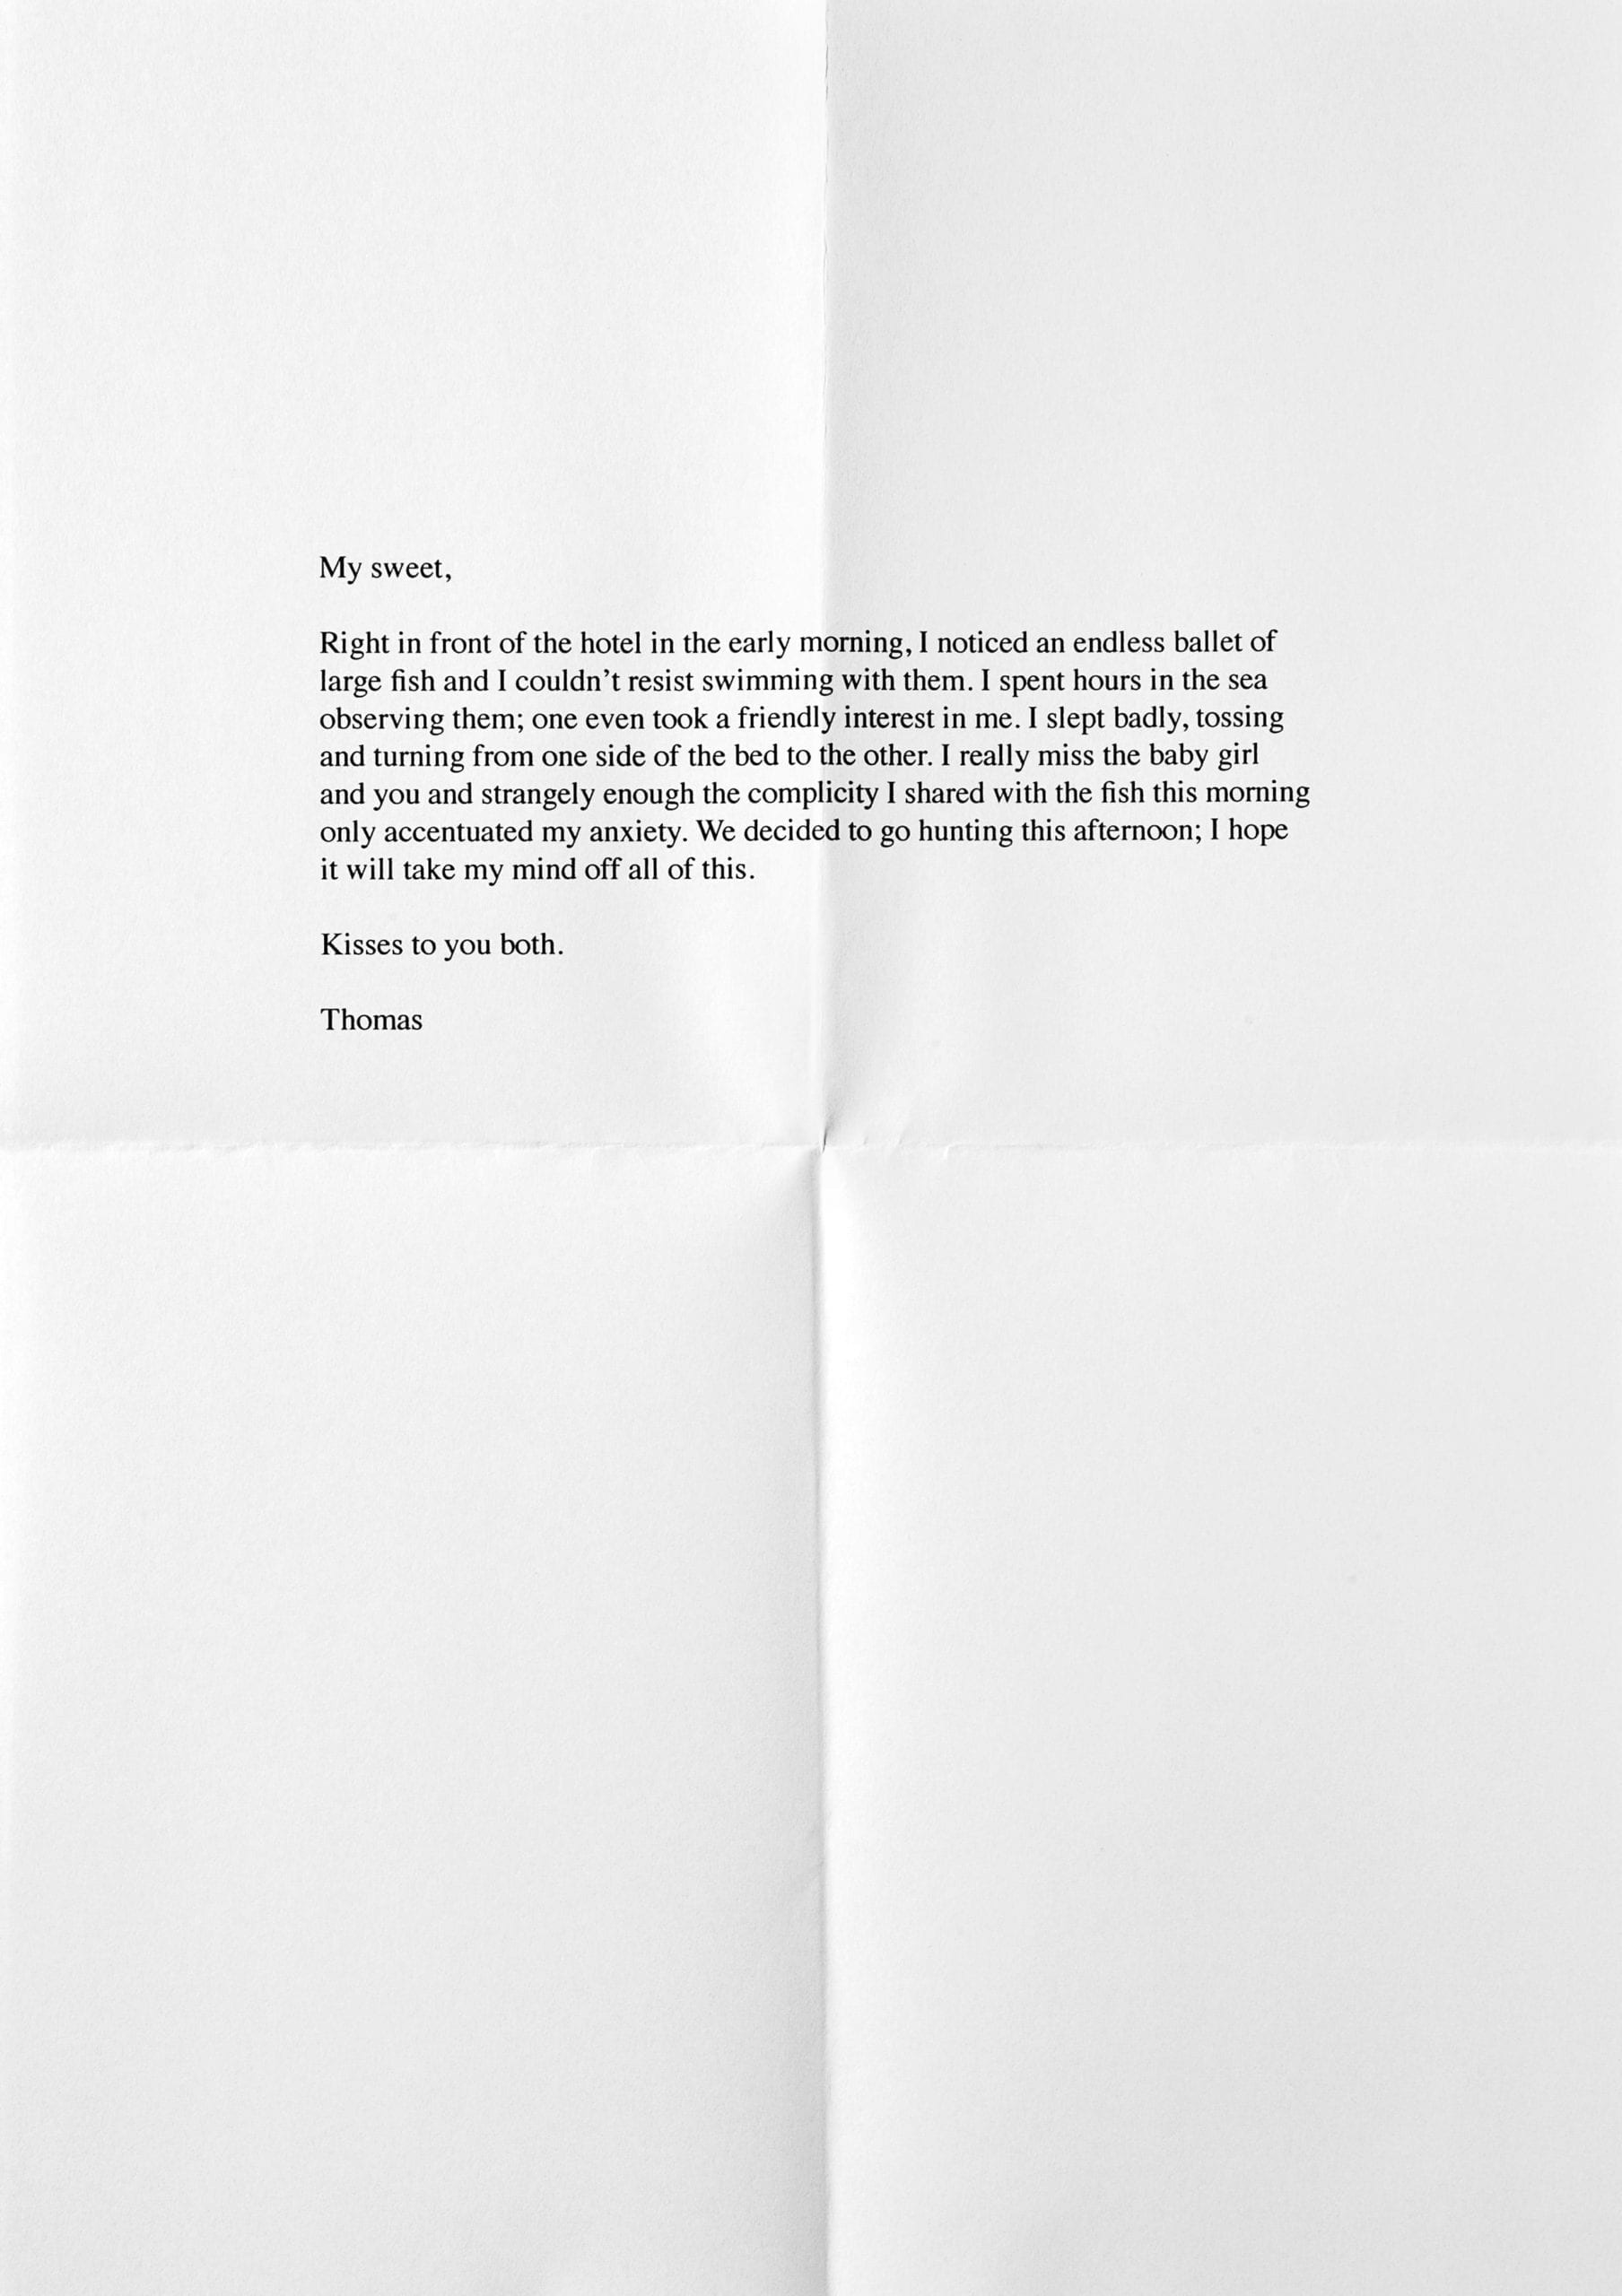 Thomas Mailaender, Letter #5 - Dolphinus, 2010. A4 typed letter. (c) Thomas Mailaender